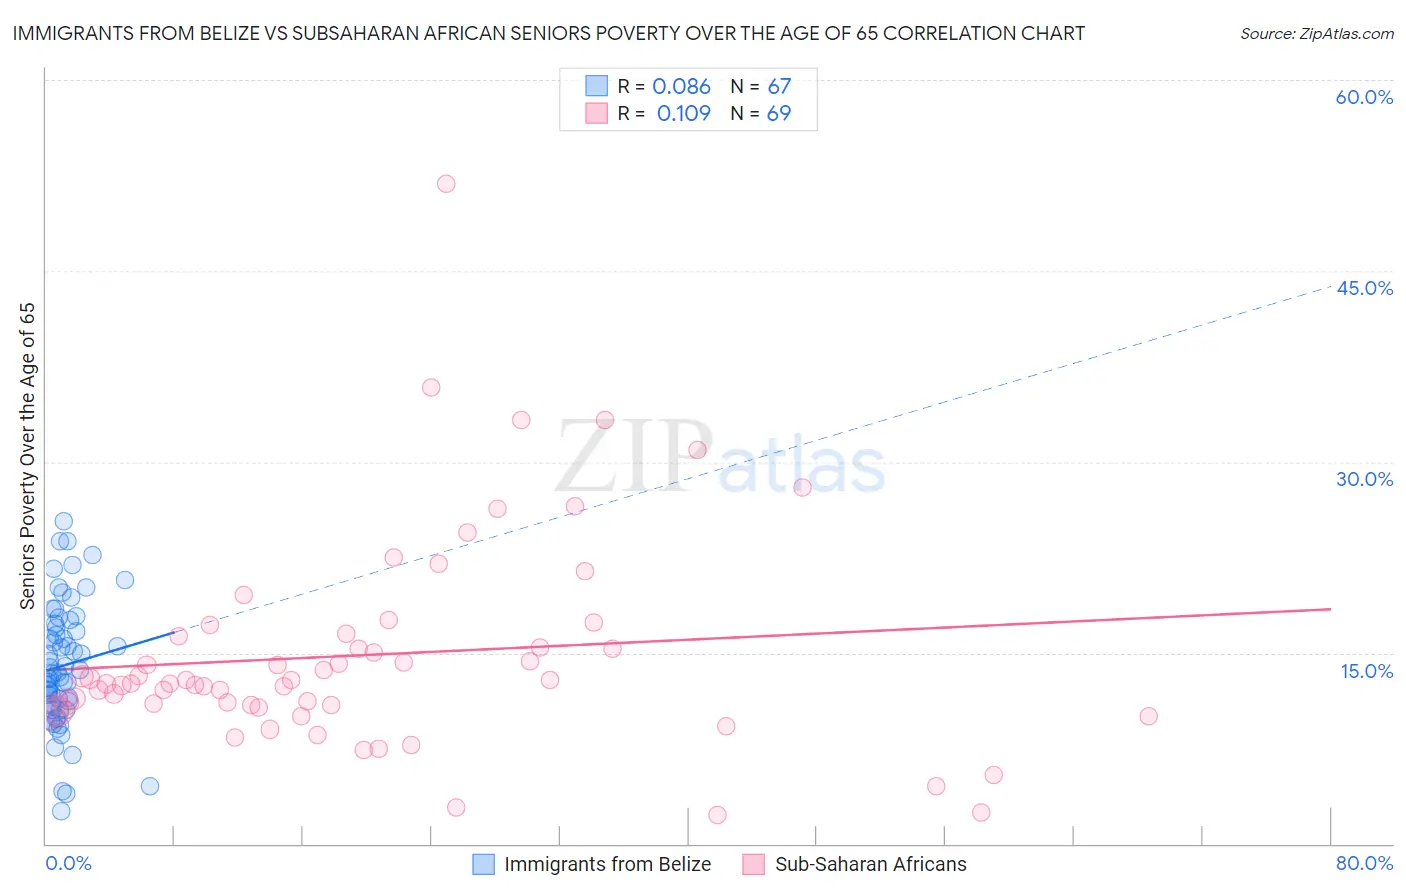 Immigrants from Belize vs Subsaharan African Seniors Poverty Over the Age of 65